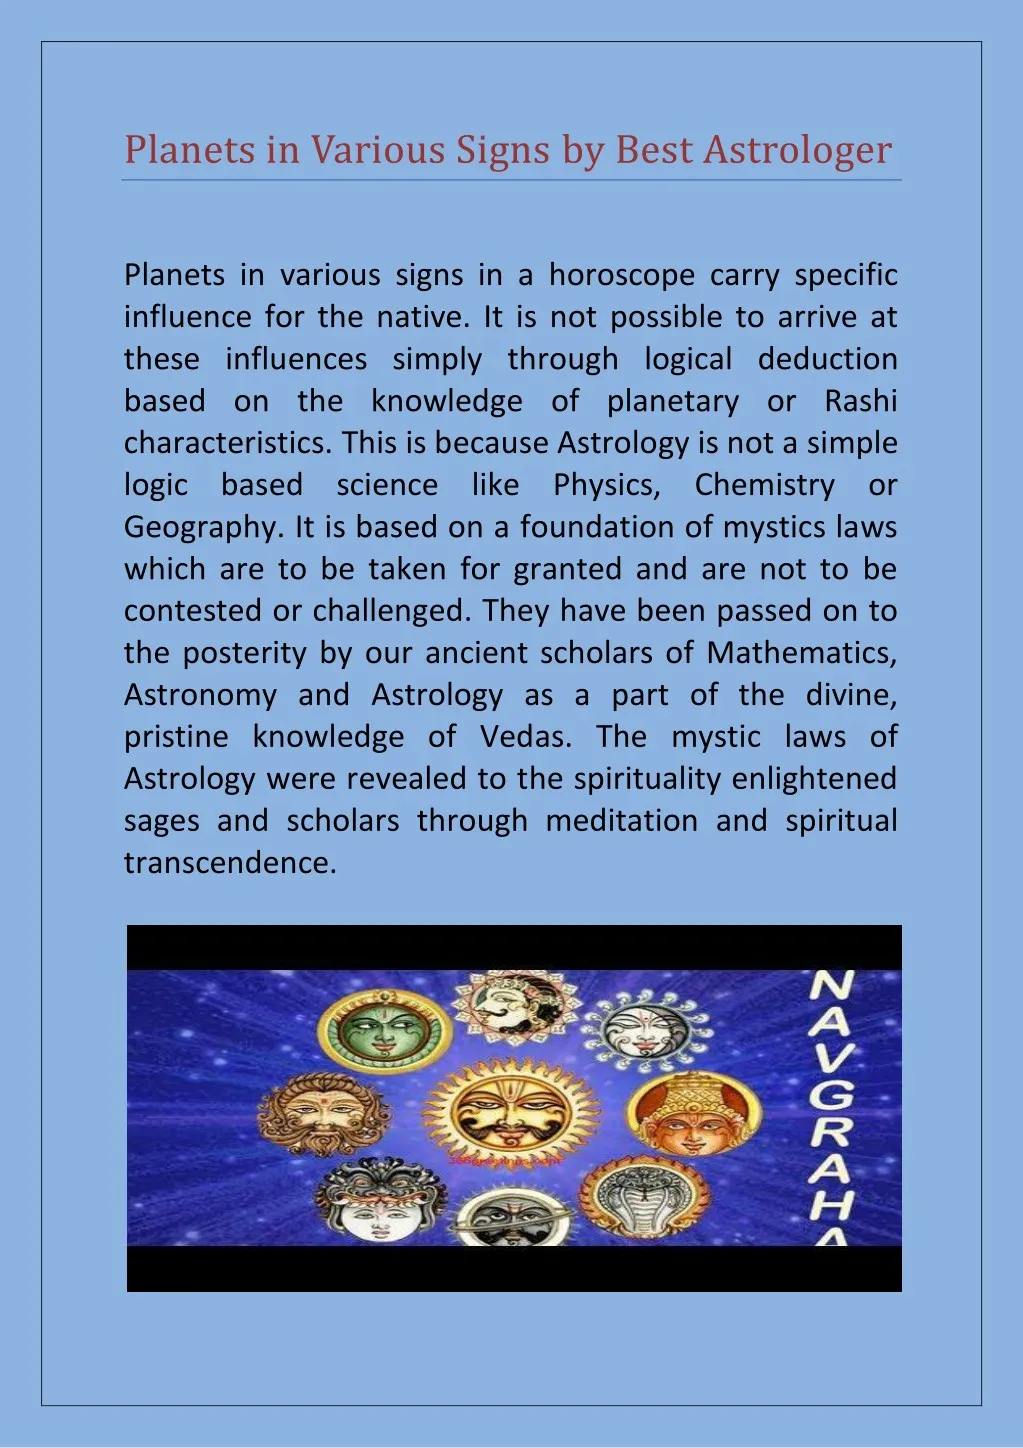 planets in various signs by best astrologer